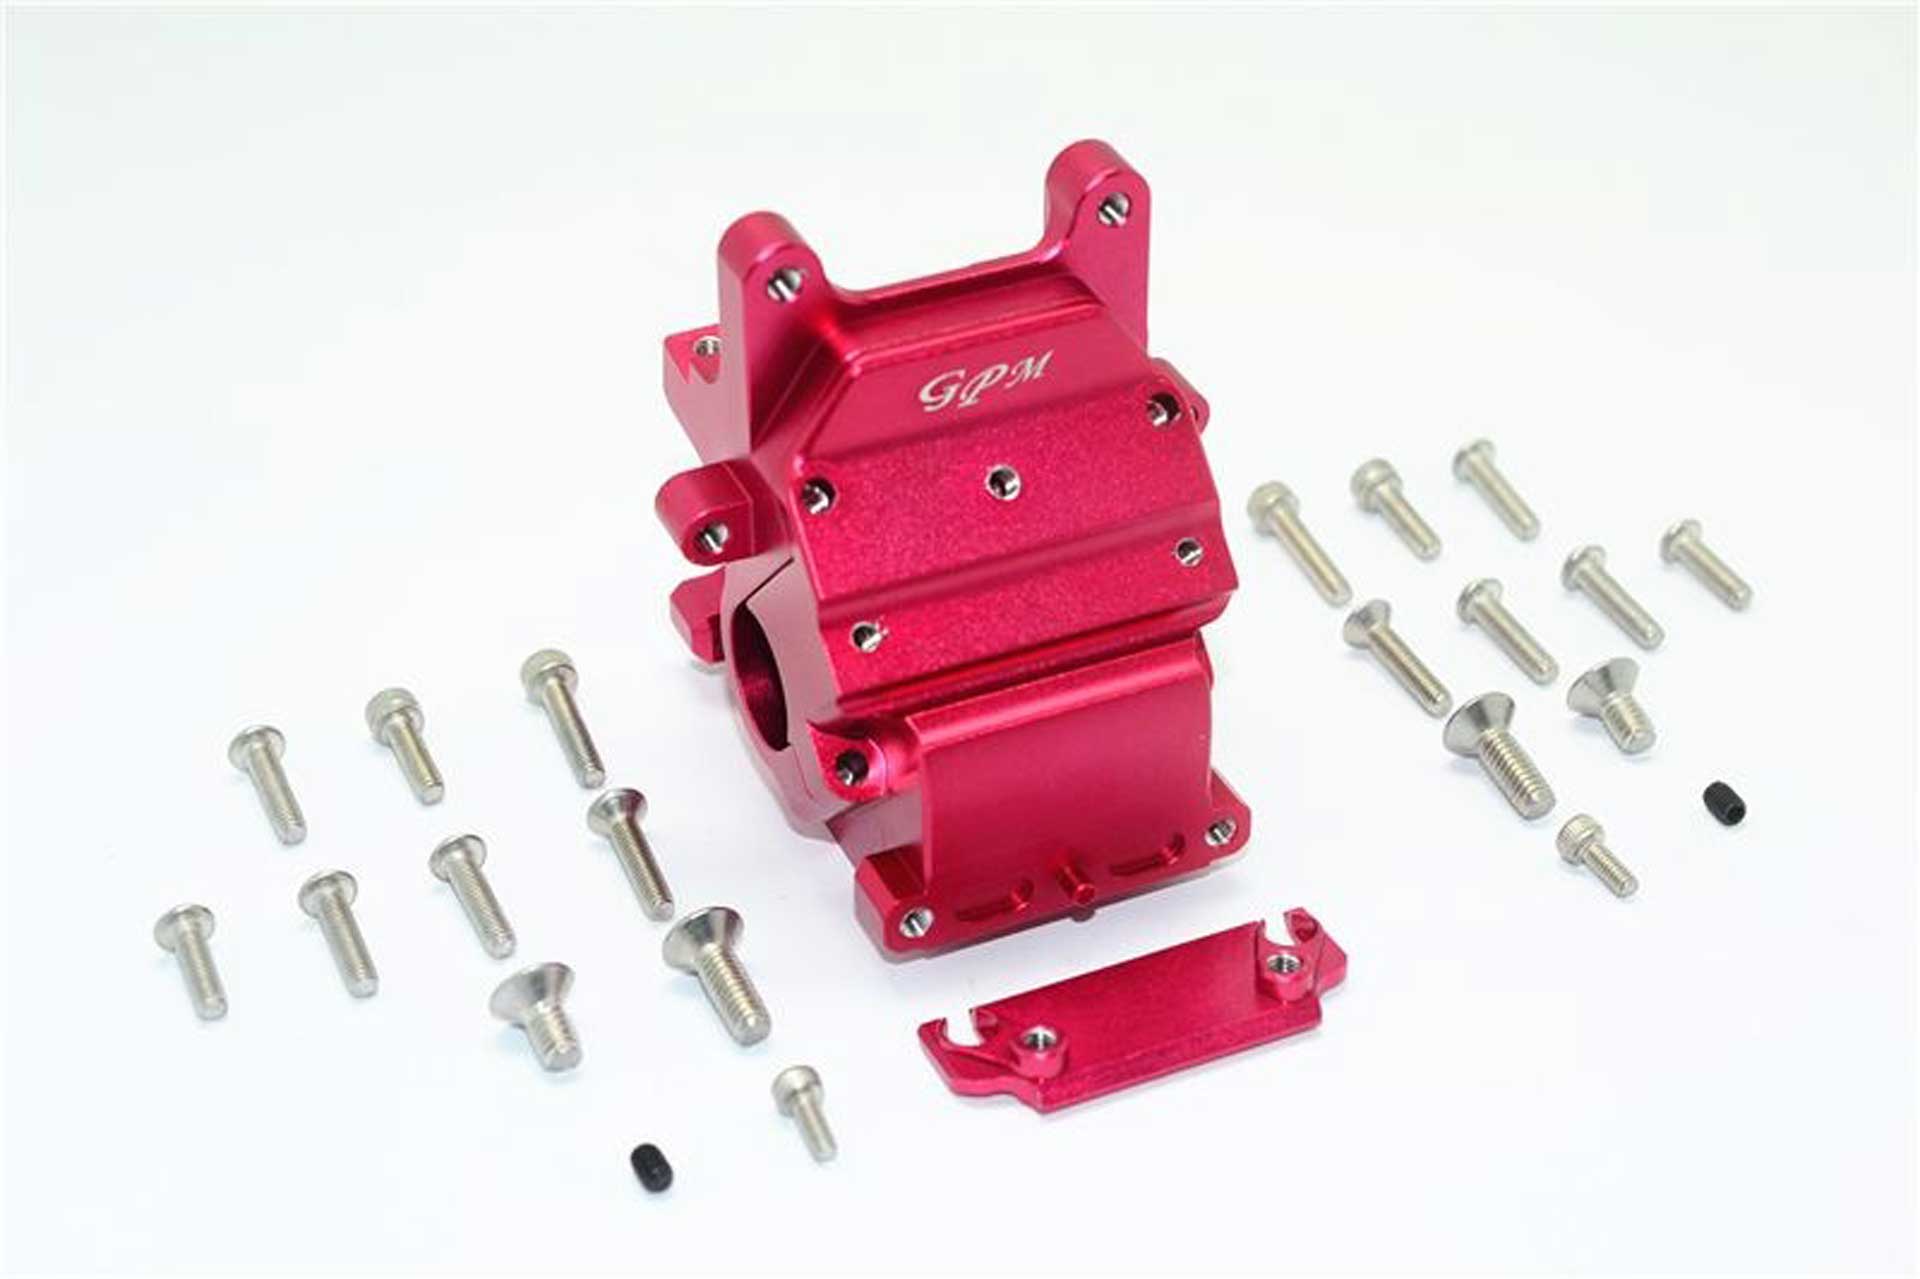 ALUMINUM FRONT/REAR GEAR BOX -25 PC SET red GPM A RRMA KRATON INFRACTION LIMITLESS NOTRIUS